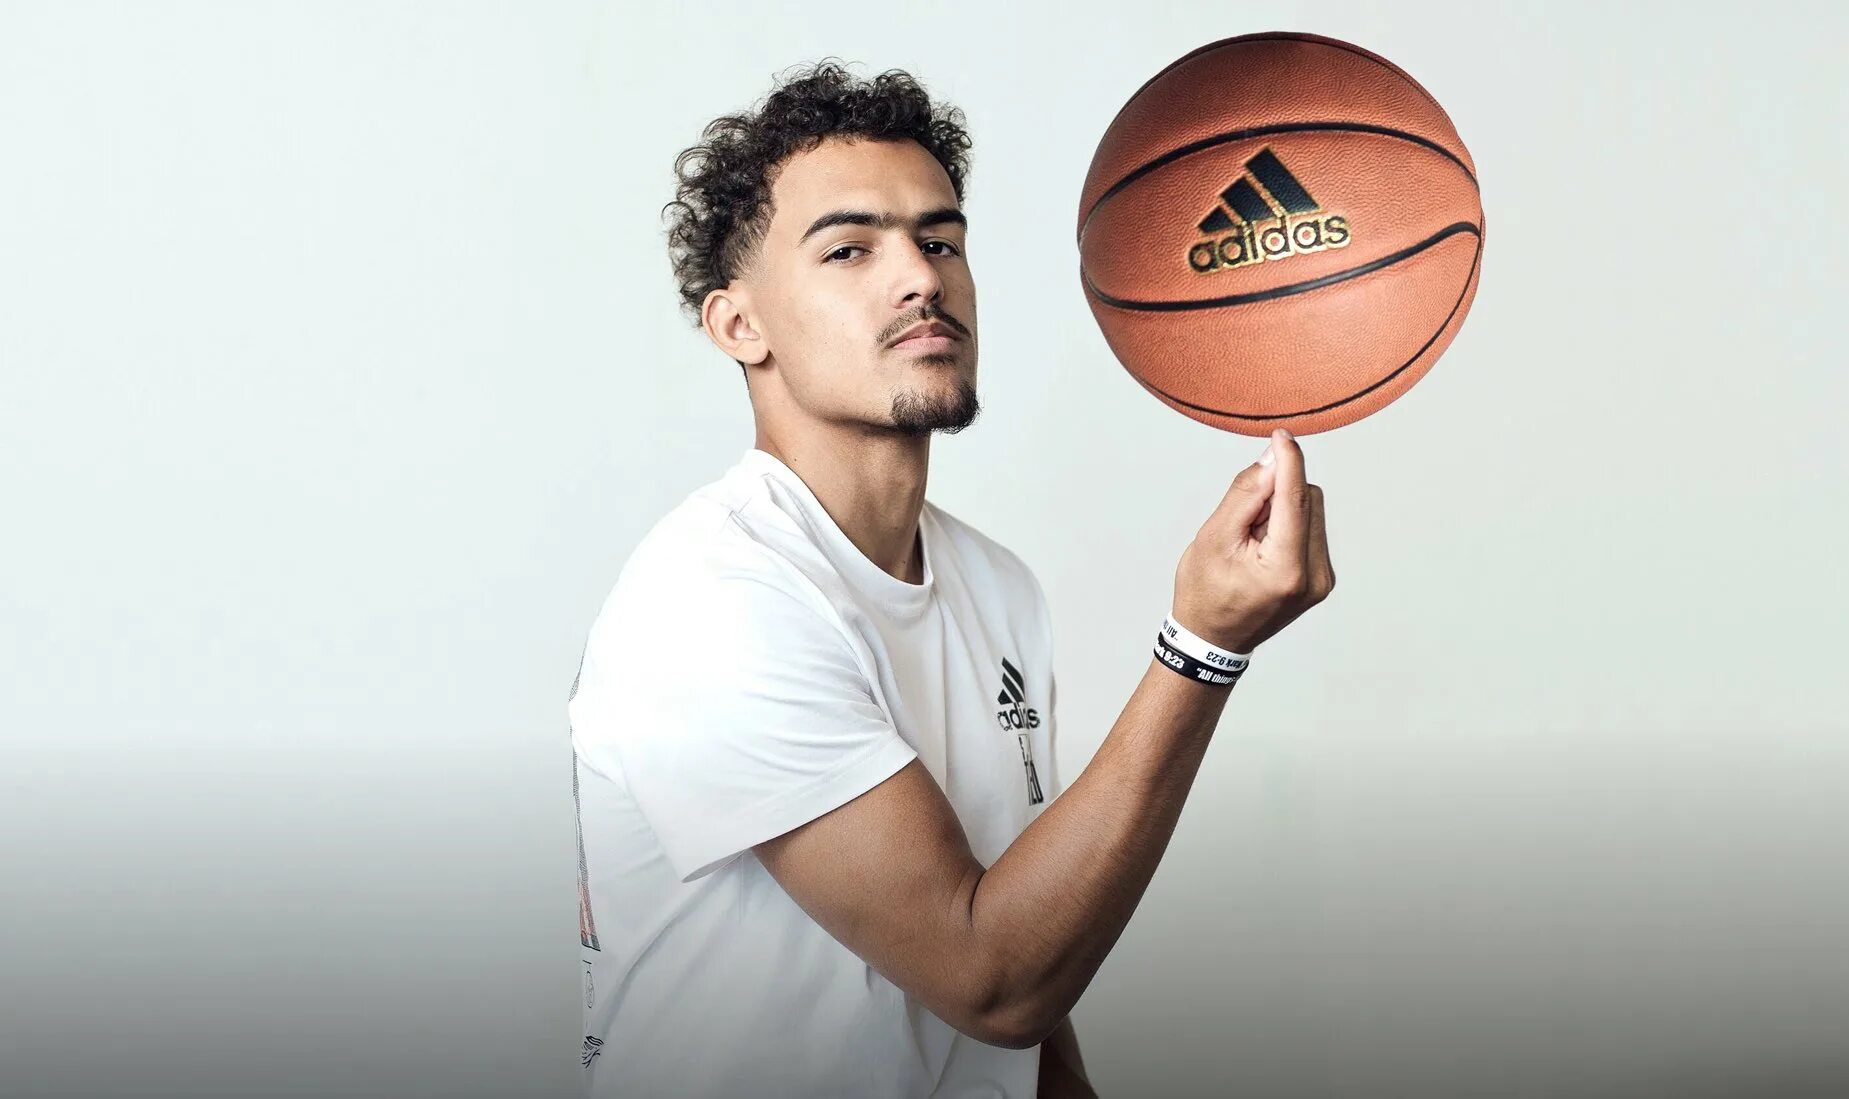 Адидас trae young. Adidas trae young 1. Trae young 1 кроссовки. Tray young 1 adidas.